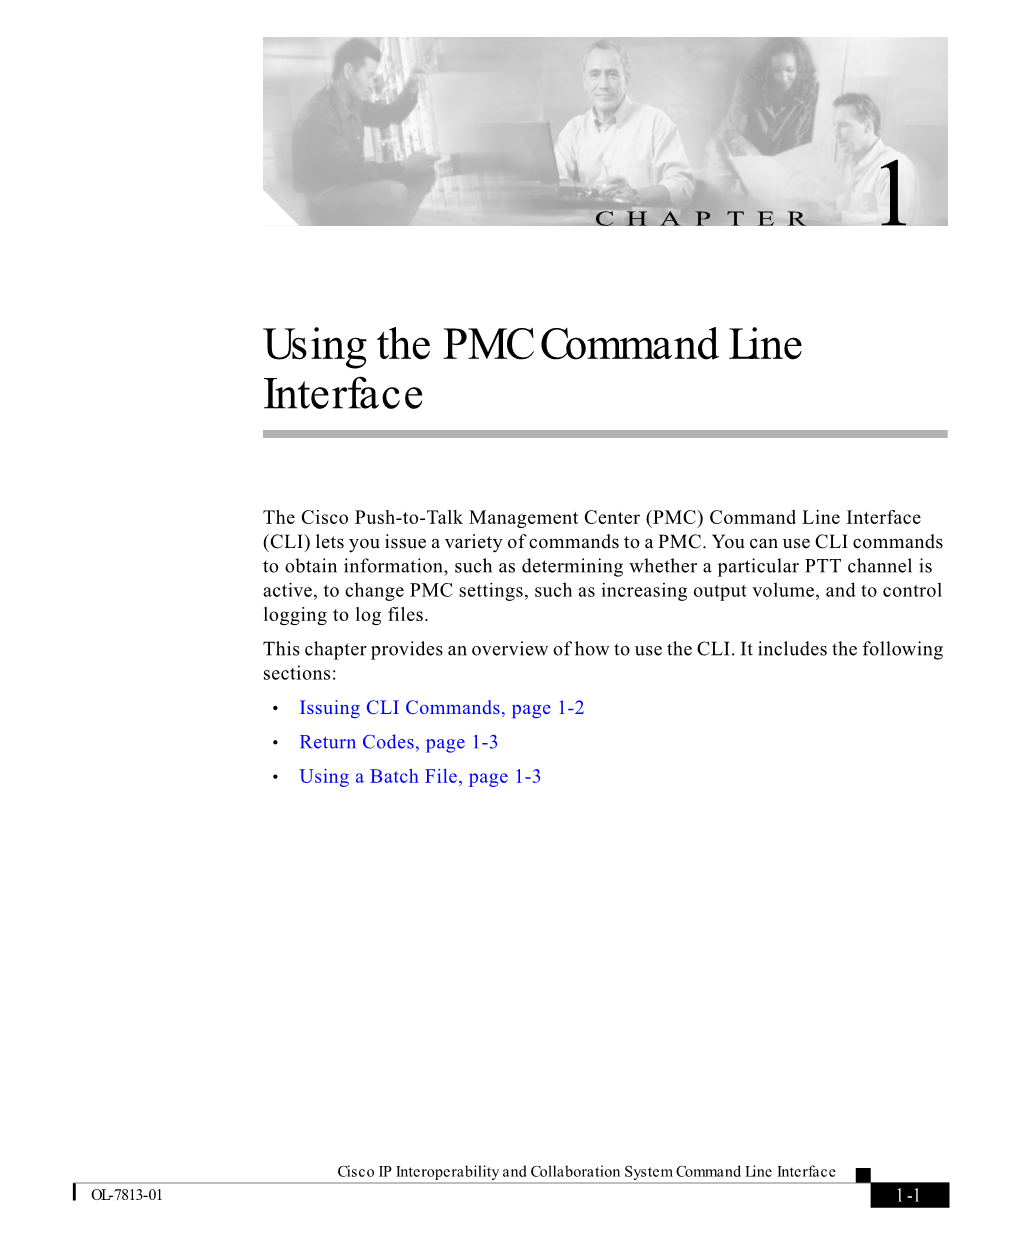 Using the PMC Command Line Interface